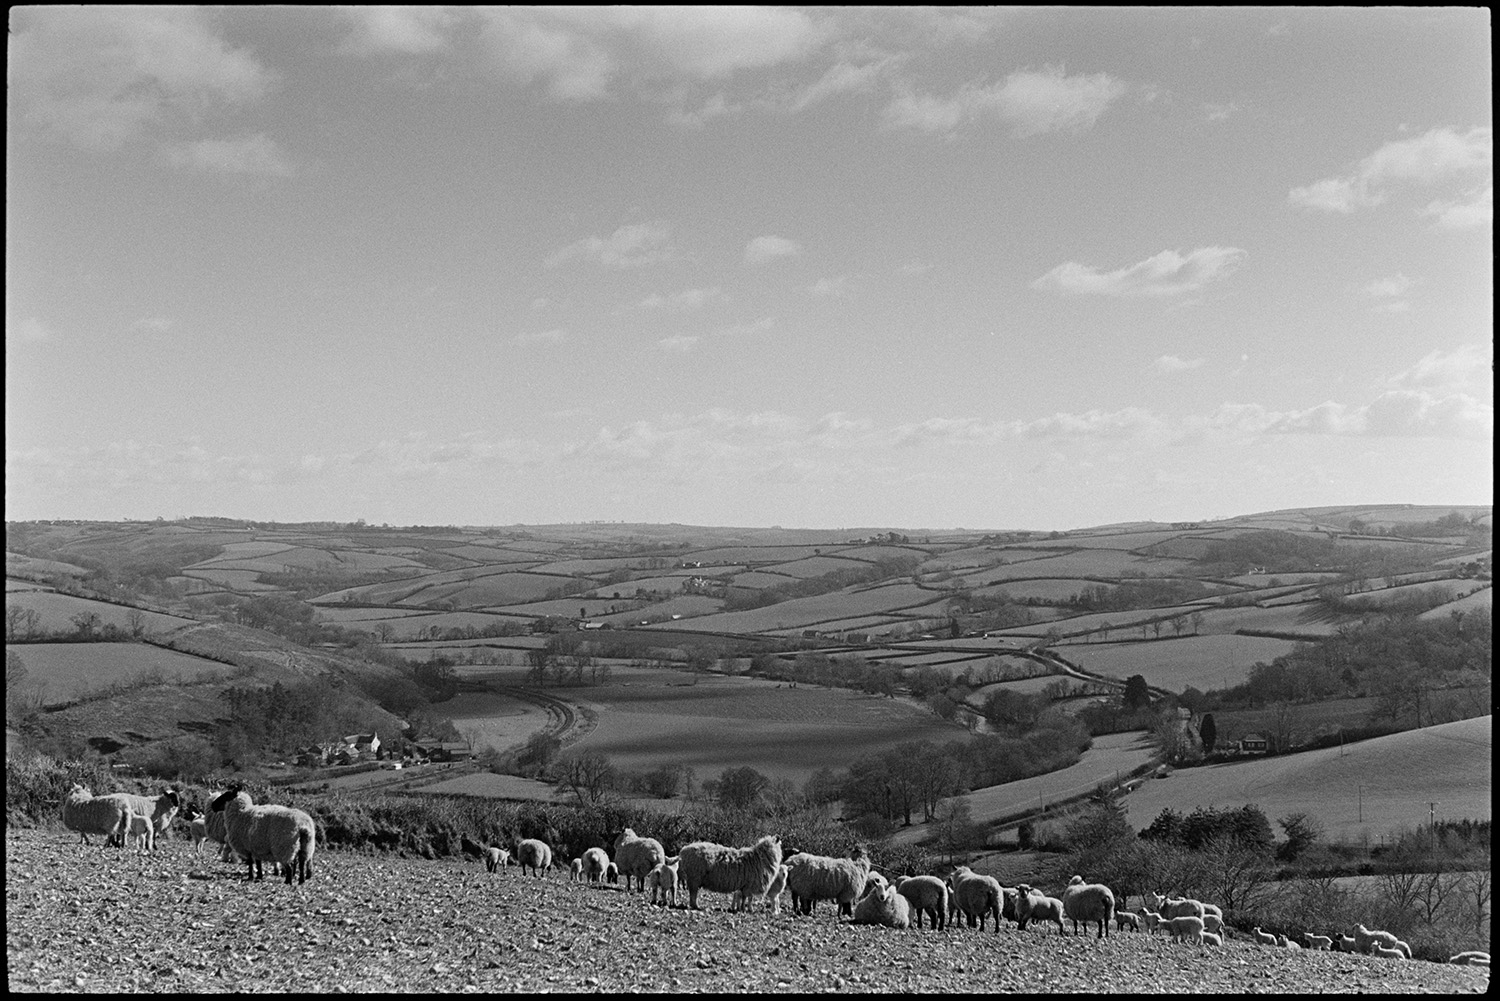 Valley and sheep.
[A view of the surrounding countryside of fields and hedgerows taken from Fisherton Farm, Atherington, with a flock of sheep grazing in a field in the foreground. ]